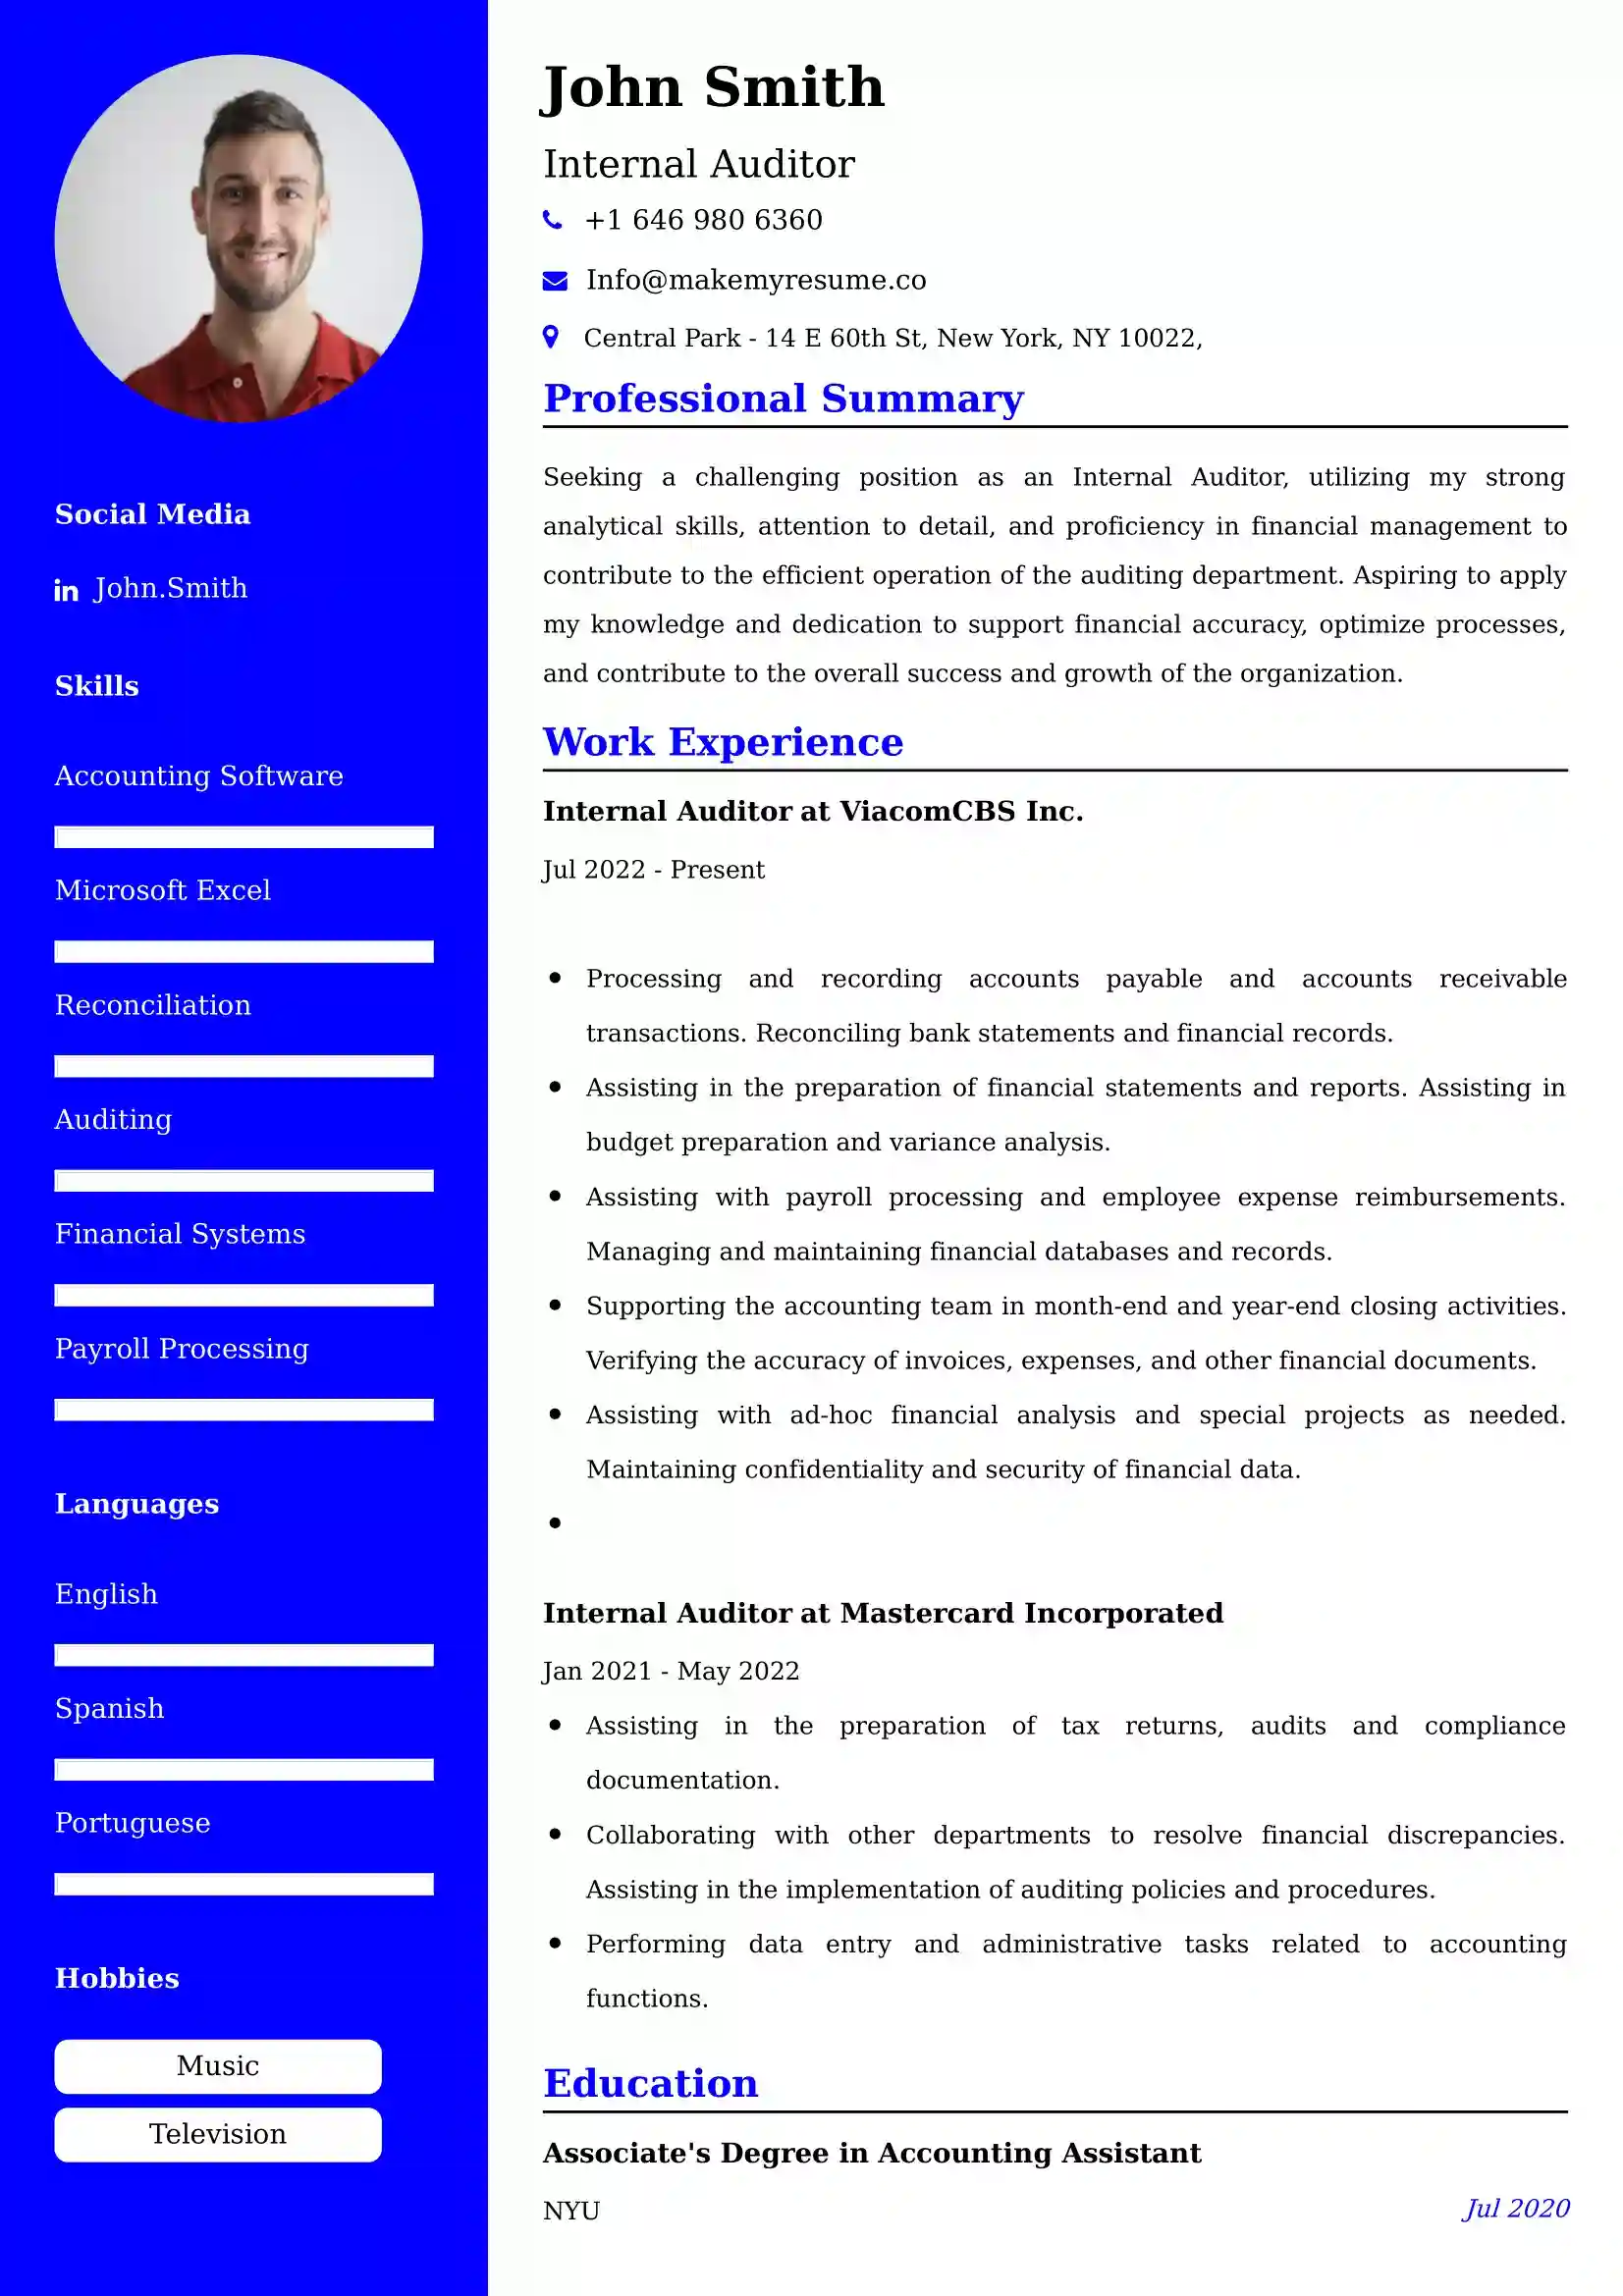 Internal Auditor Resume Examples - Brazilian Format, Latest Template